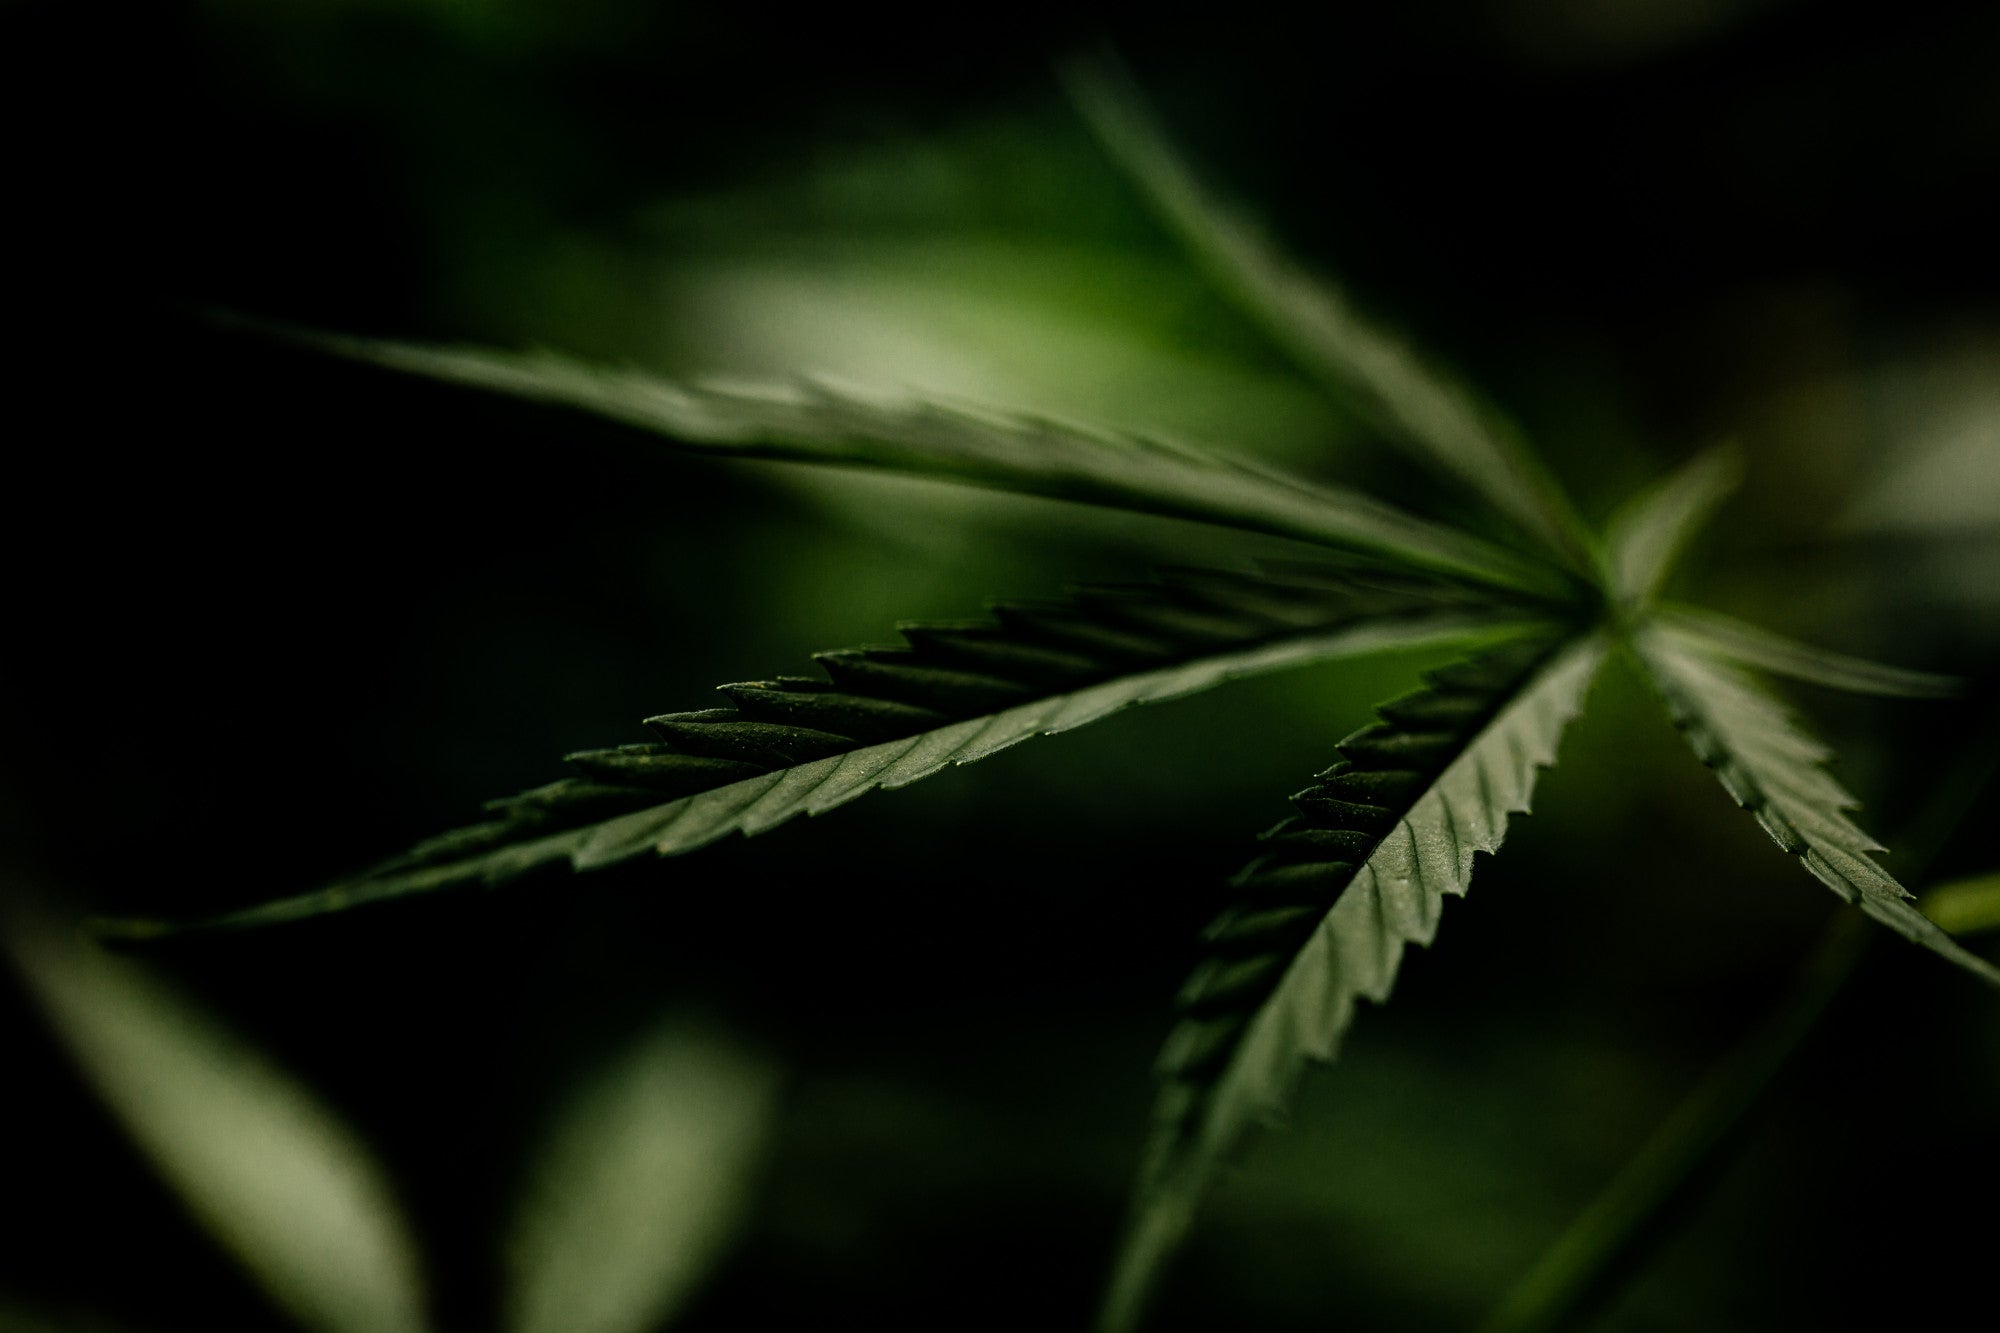 Harnessing Hemp: The Multifaceted Benefits of a Misunderstood Plant